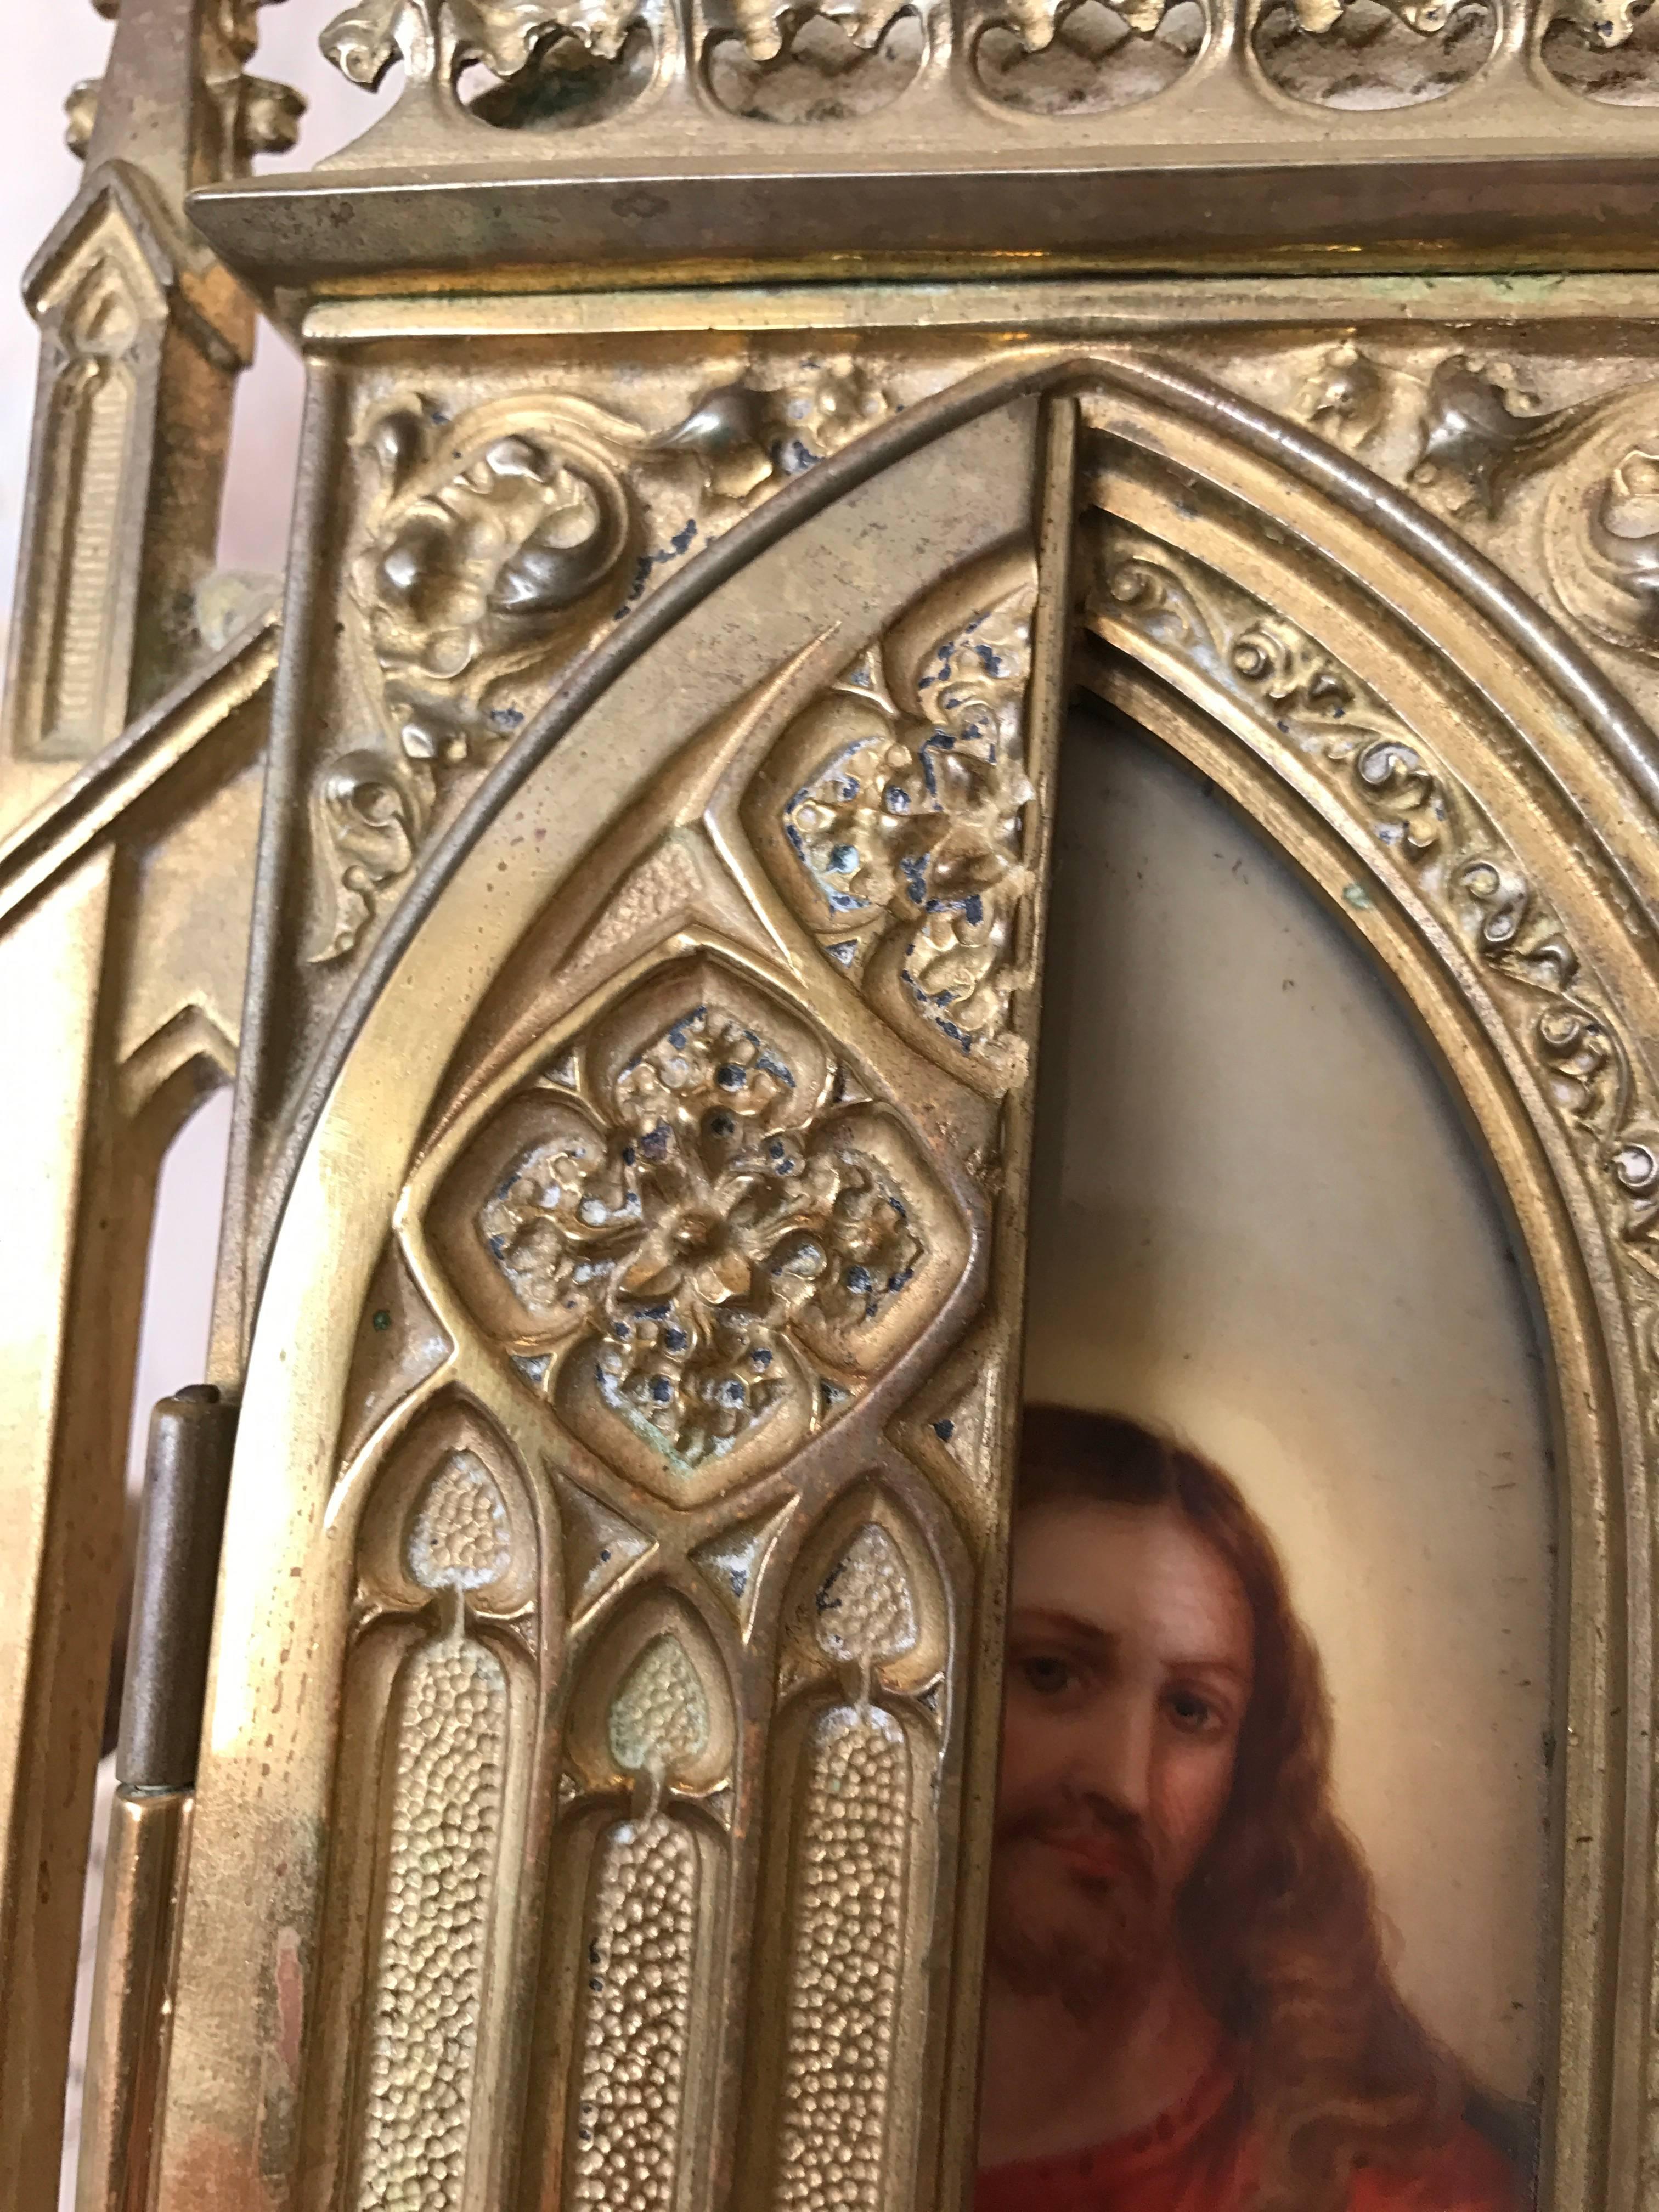 Marvellous antique picture frame with a hand-painted Christ on a porcelain plaque.

This antique, Gothic Revival picture frame with exquisite details is an absolute joy to behold. Behind the doors of this bronze chapel is a unique and great quality,